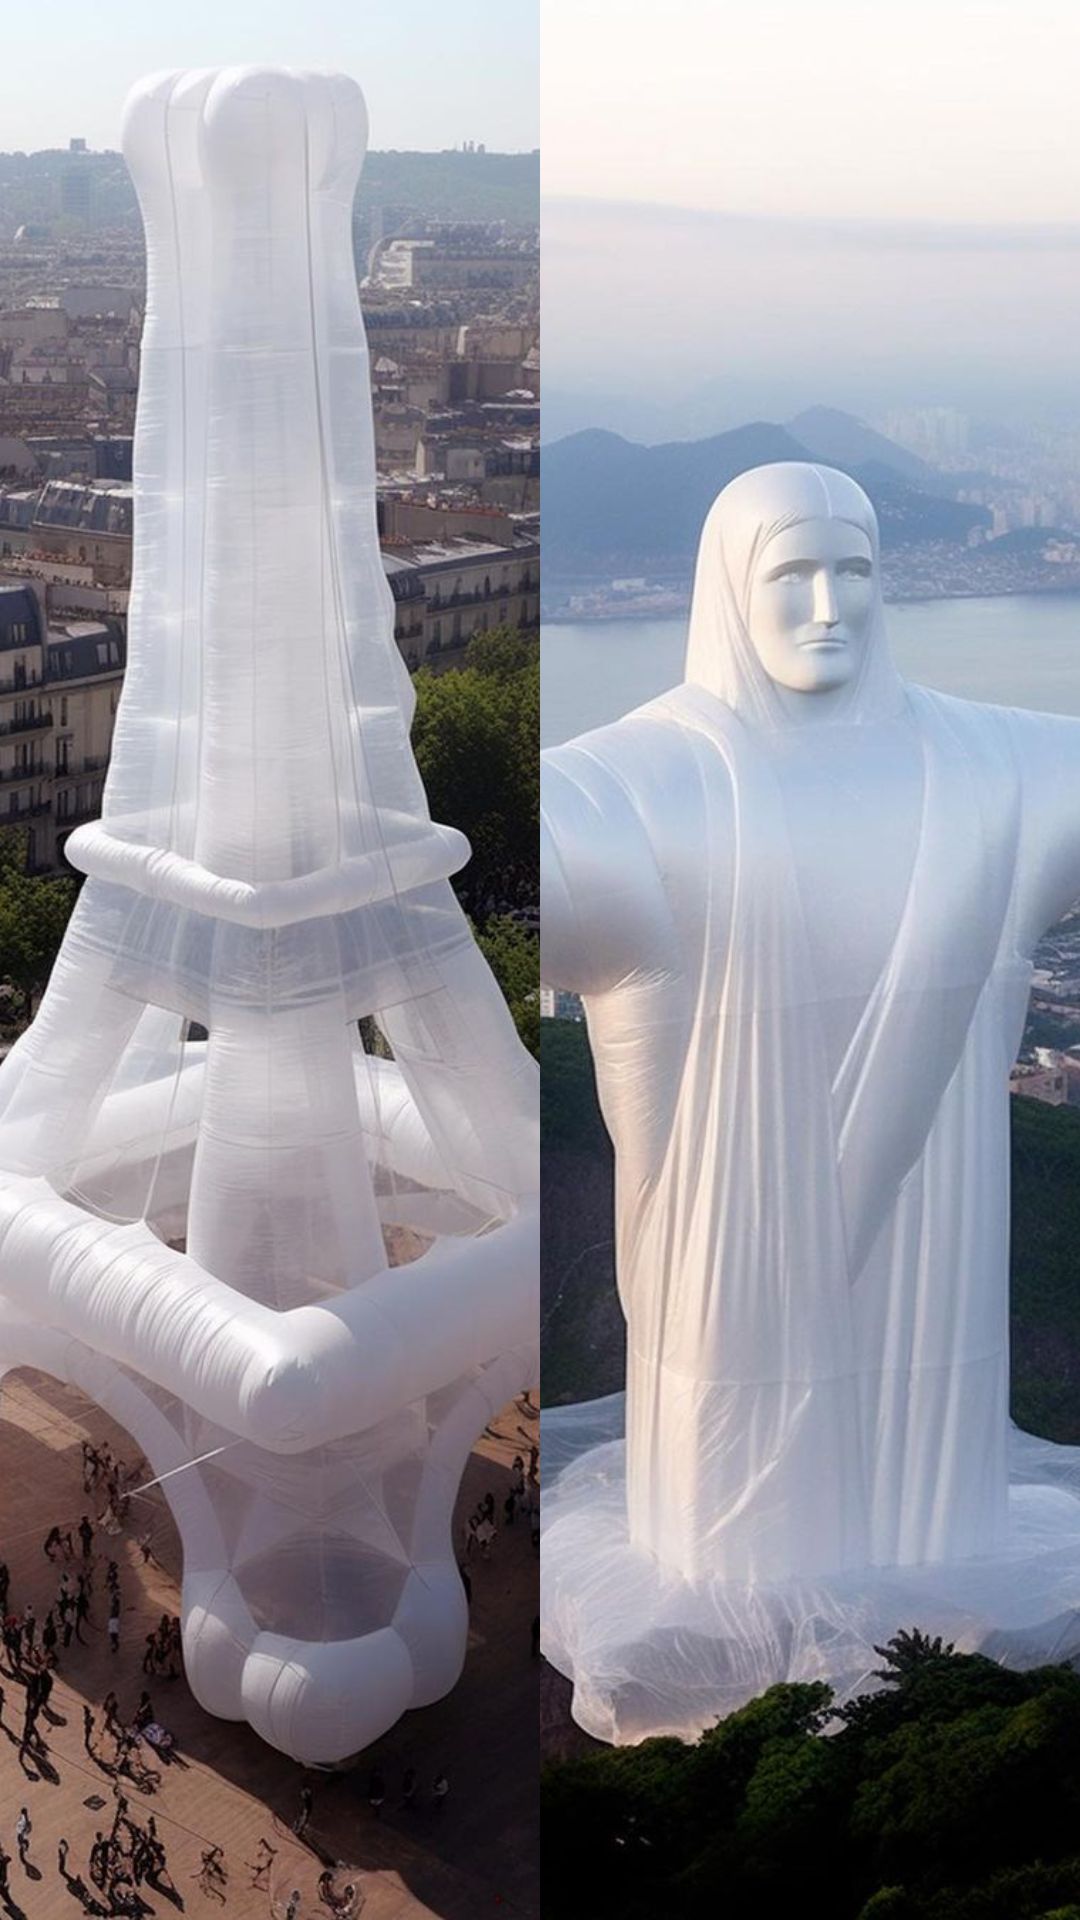 From Taj Mahal to Eiffel Tower: AI Turns Monuments Into Inflatable Wonders